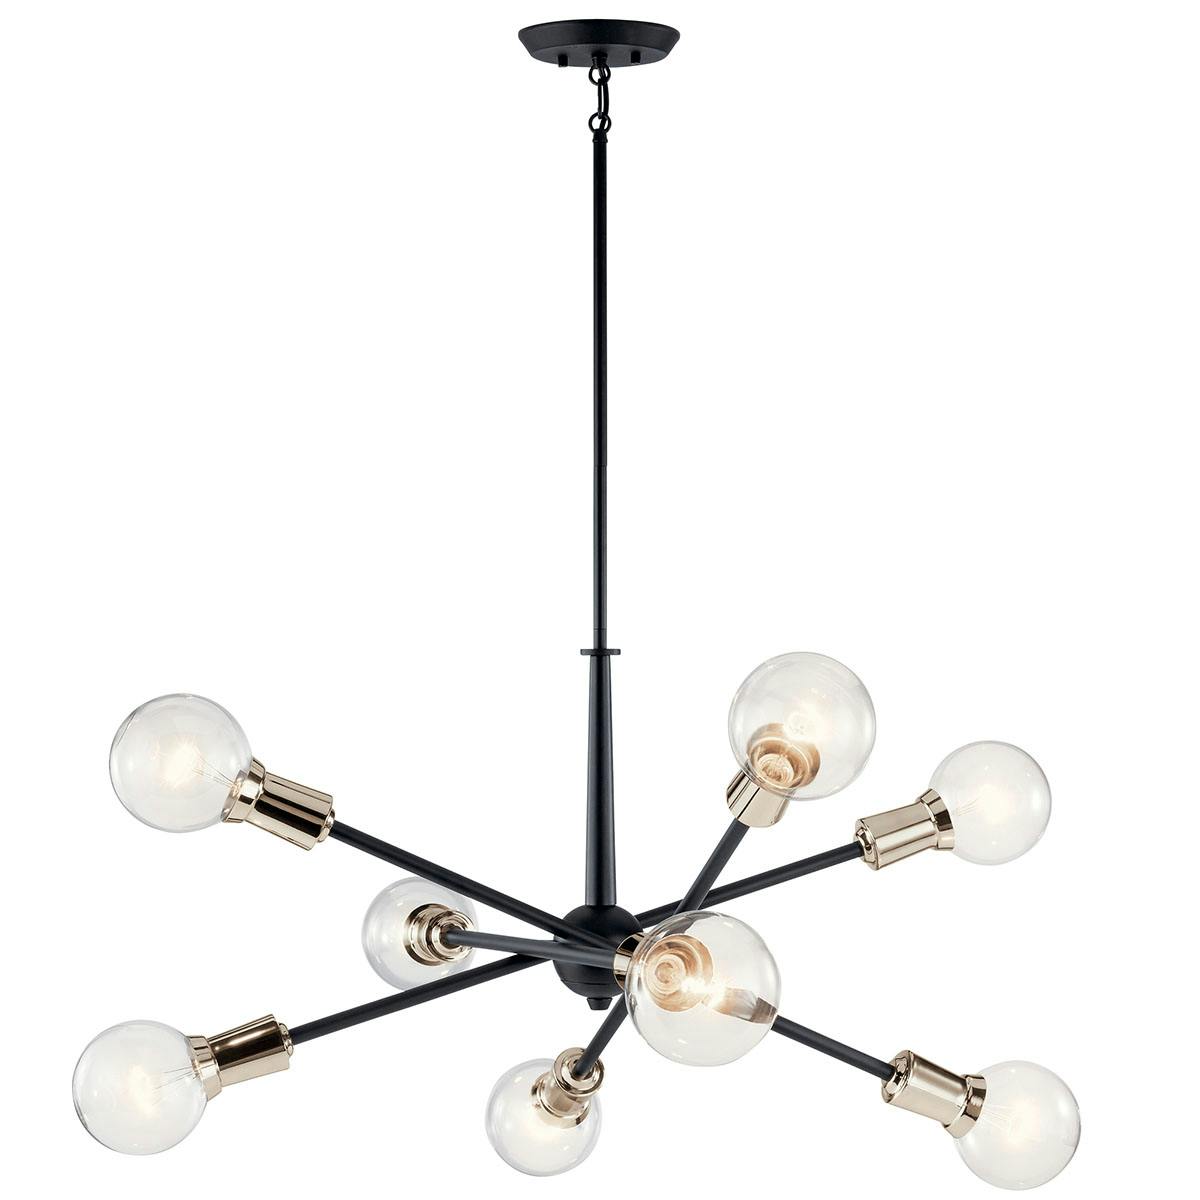 Armstrong 8 Light Chandelier Black on a white background